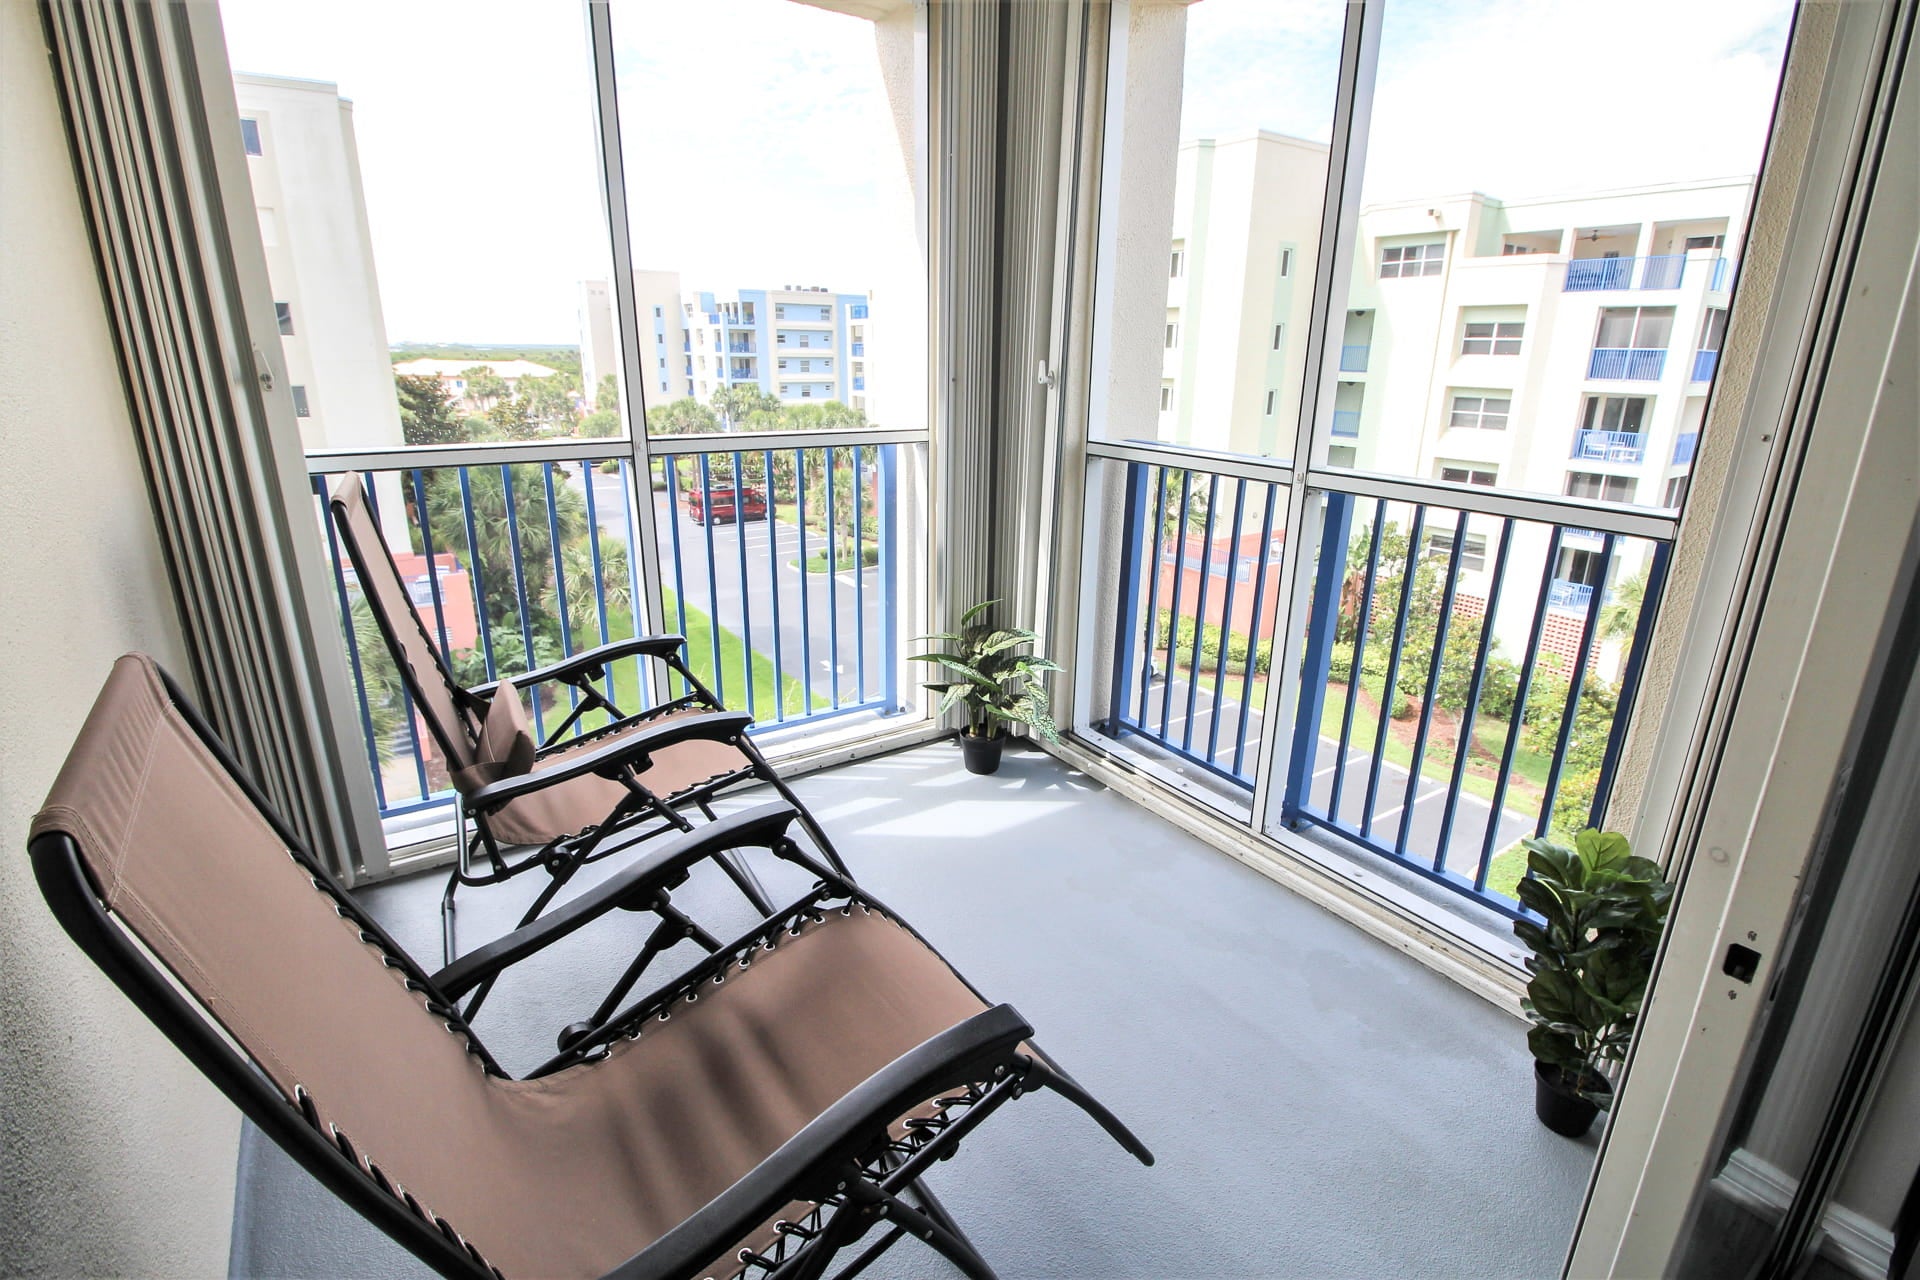 Lounge on the Furnished Balcony